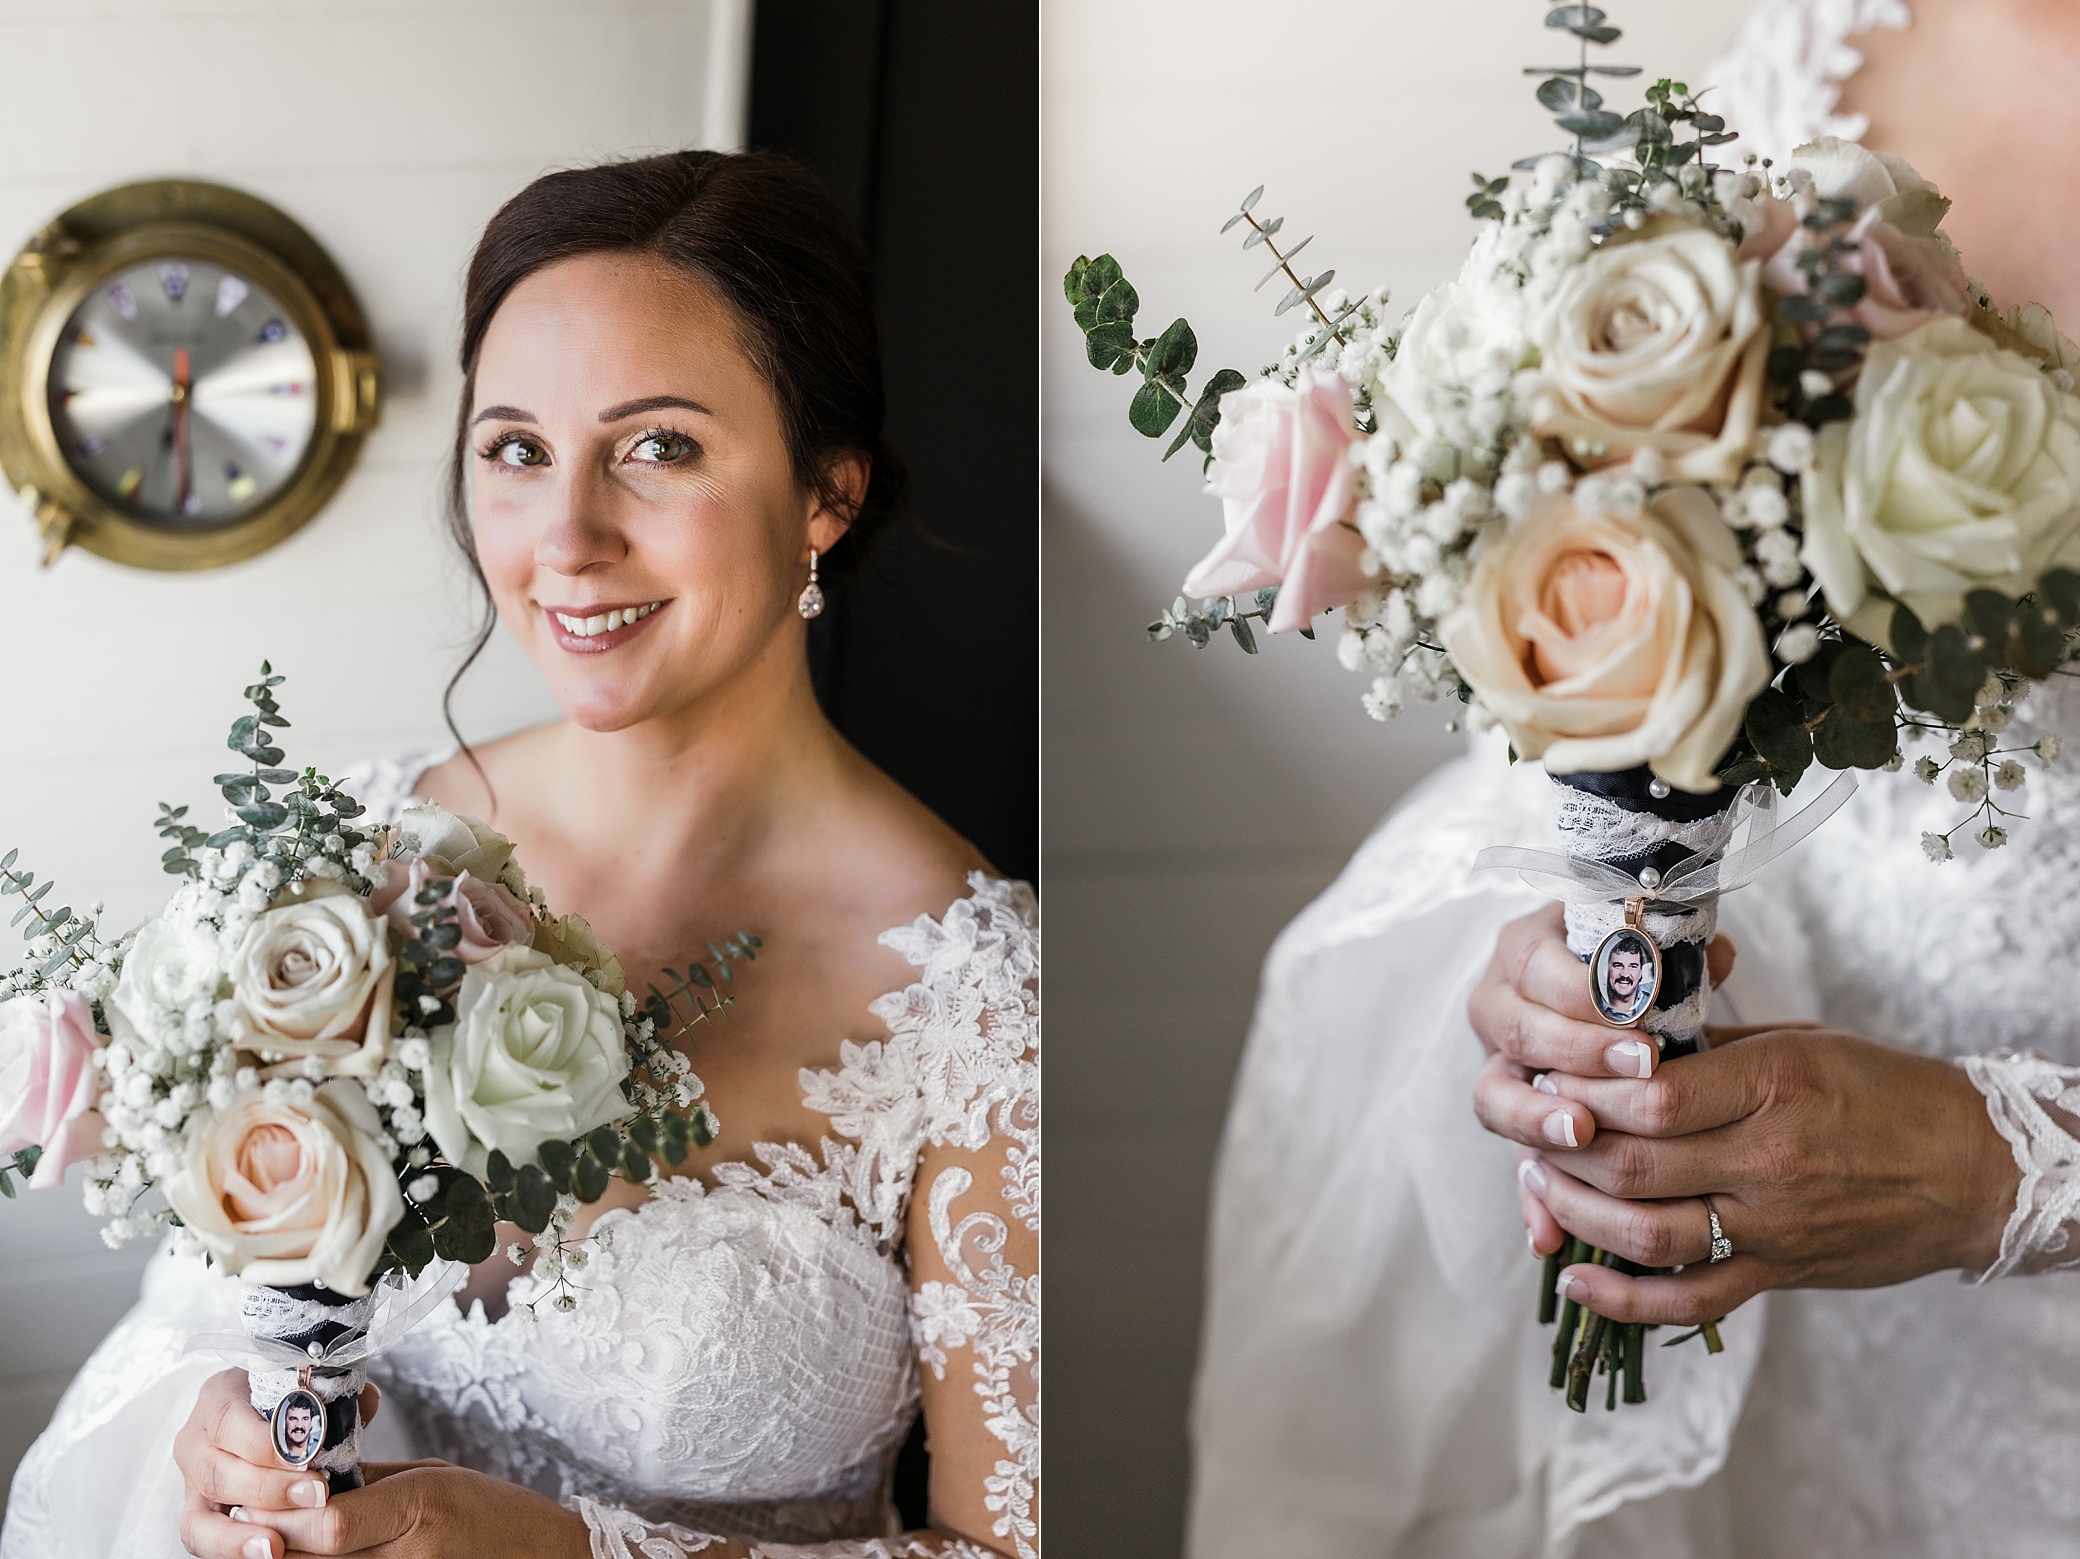 Bridal photos with bridal bouquet and tribute to father | Photographed by Seattle Wedding Photographer, Megan Montalvo Photography 